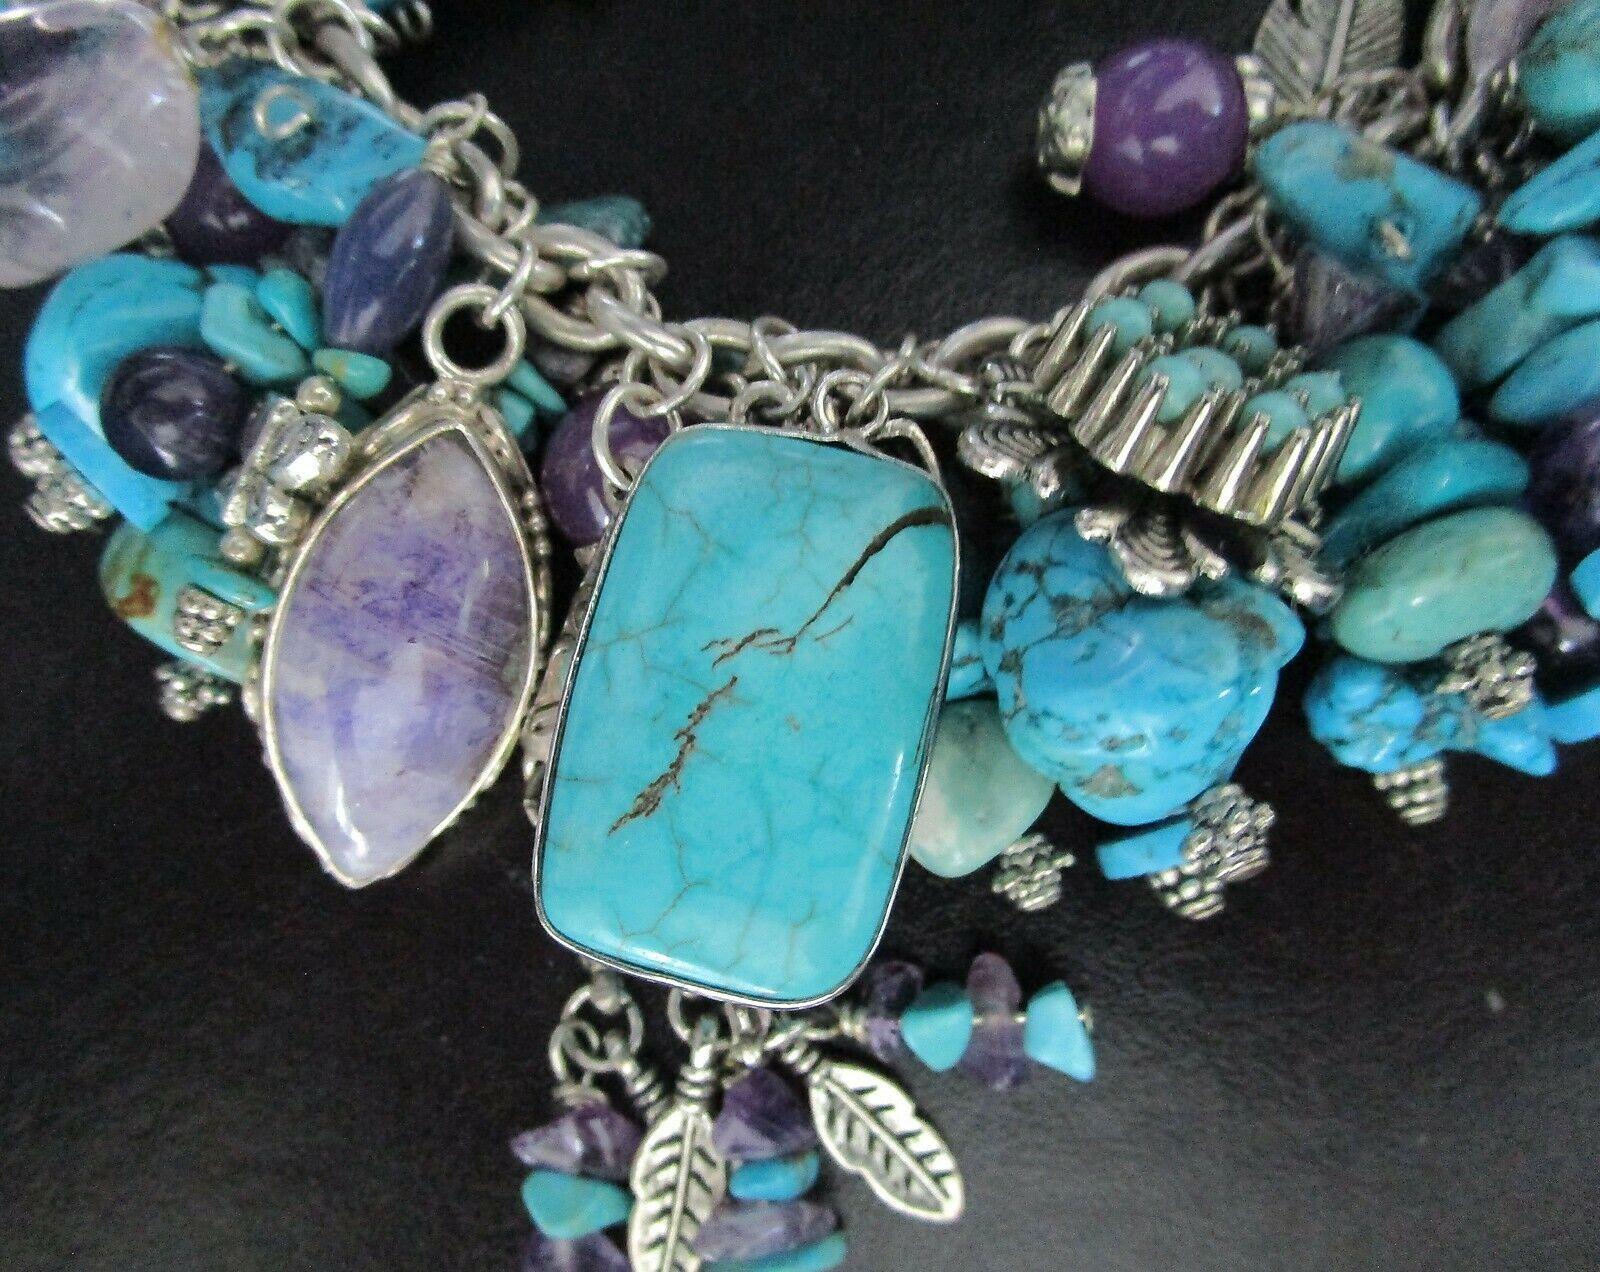 Custom made Vintage Genuine Blue Turquoise, Amethyst and Sterling Silver Multi Charm Bracelet. Custom made. Measuring approx. 8.5